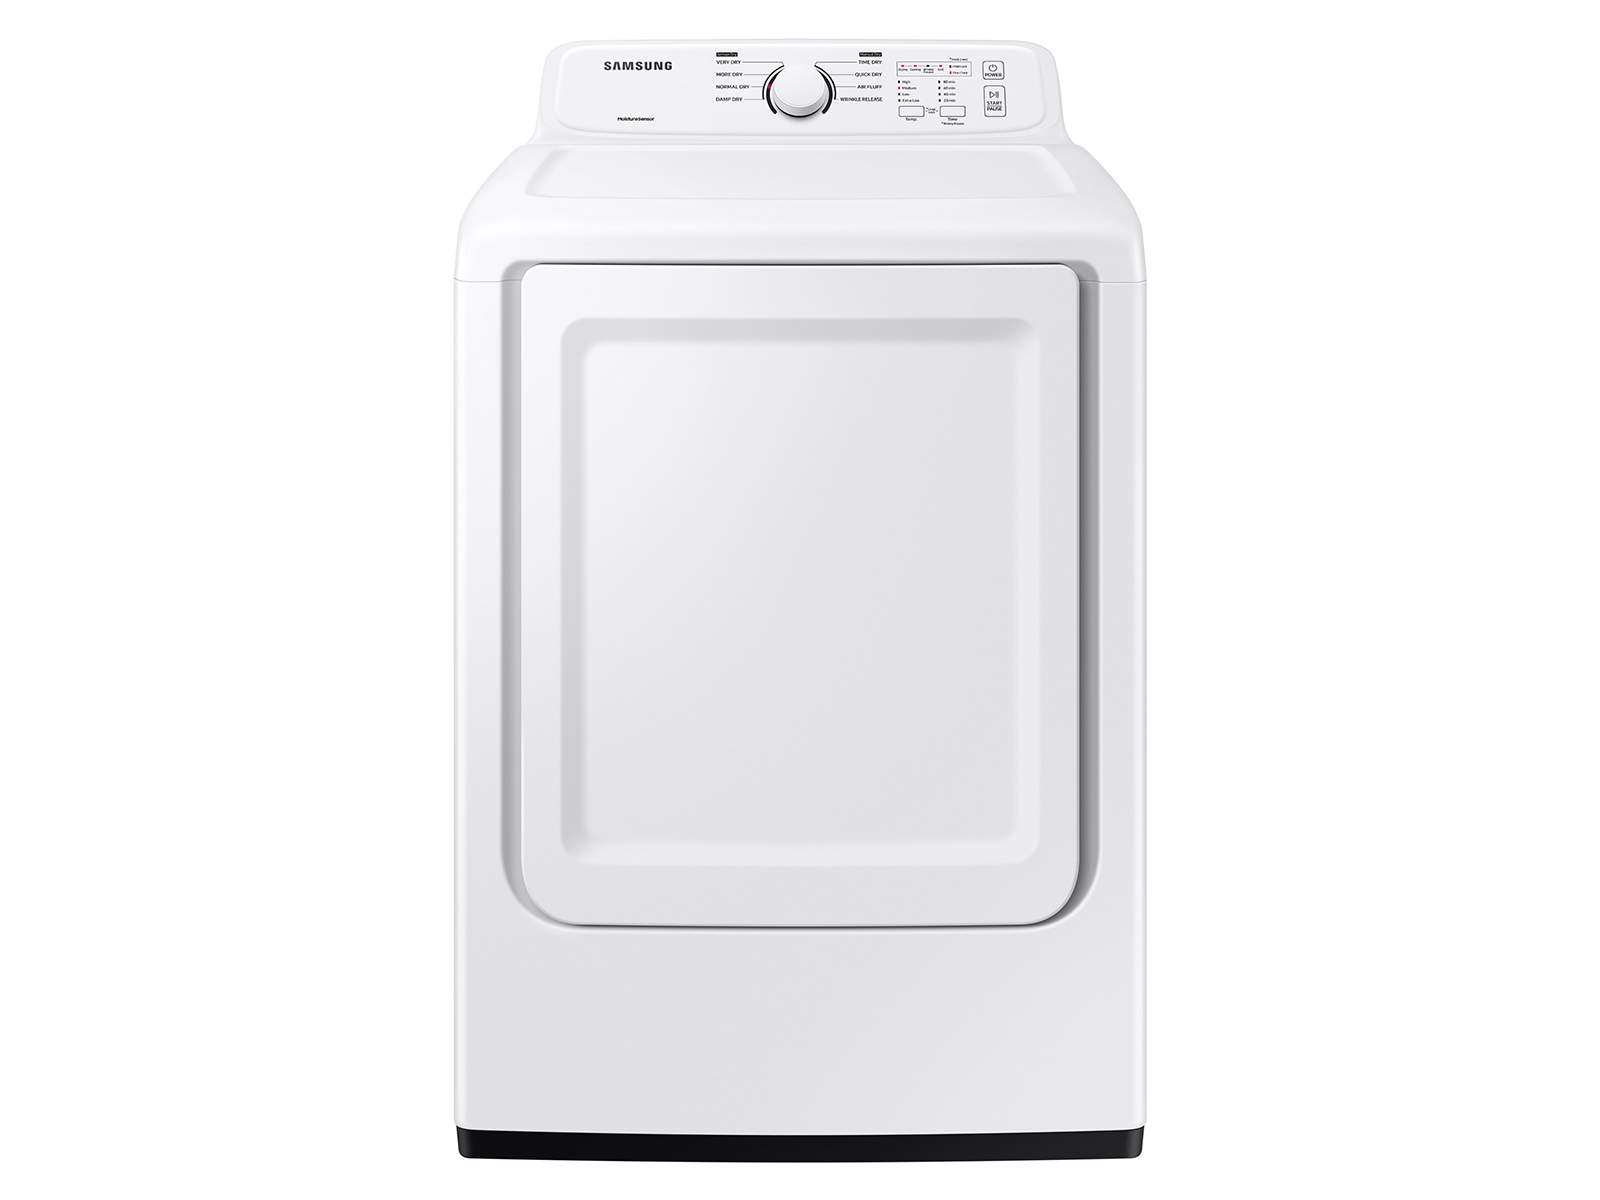 Samsung 7.2 cu. ft. Gas Dryer with Sensor Dry and 8 Drying Cycles in White(DVG41A3000W/A3)